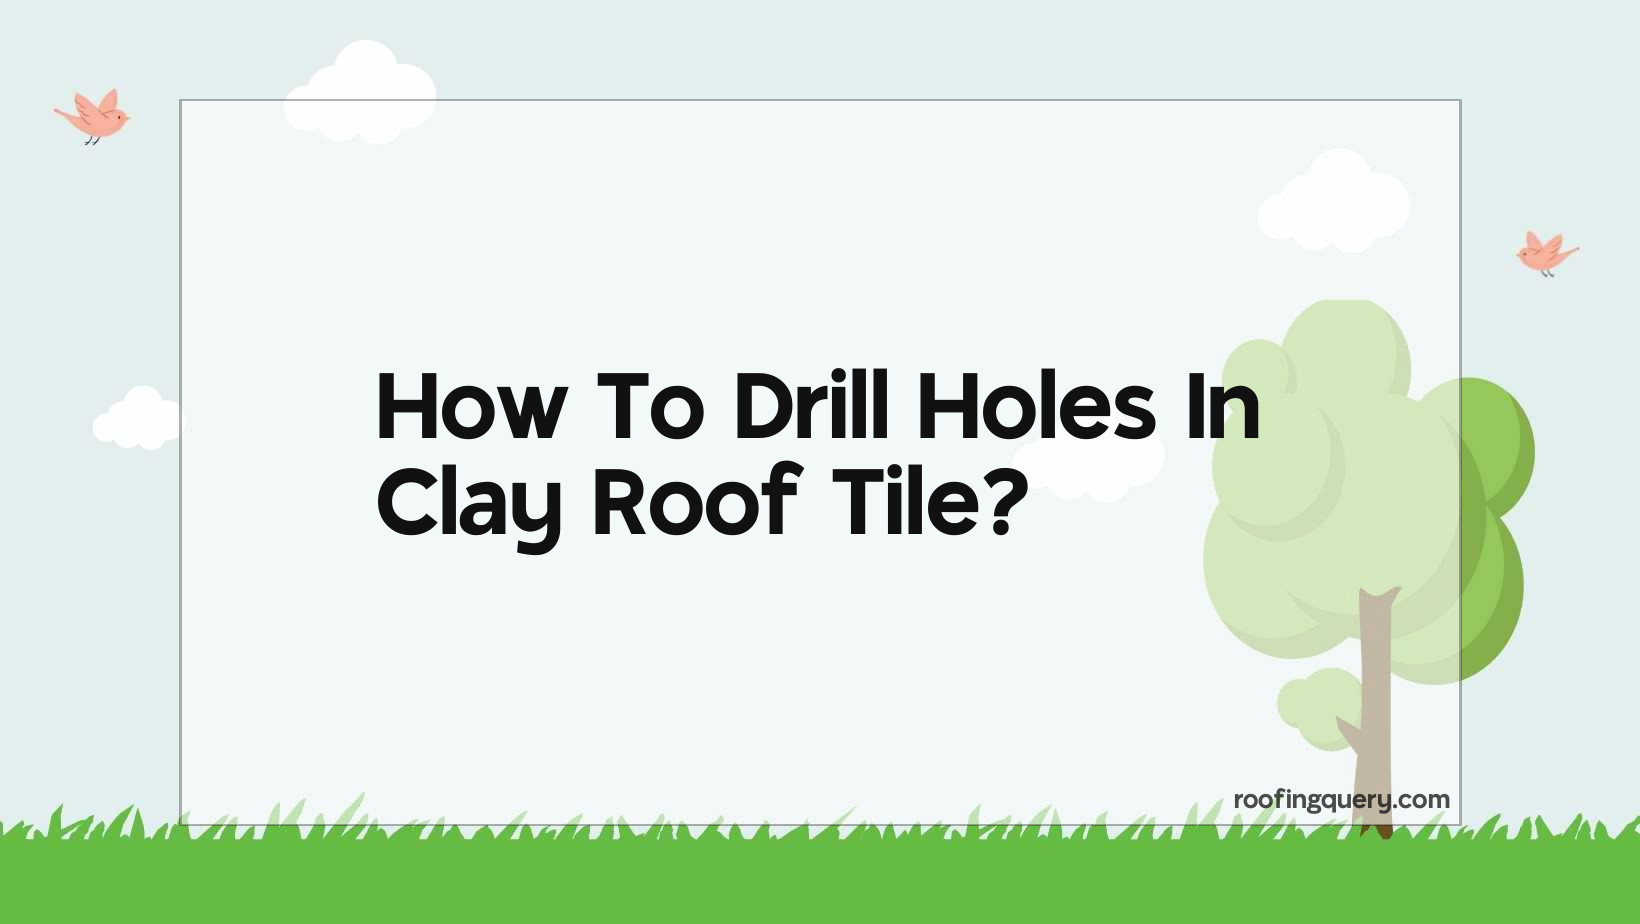 How To Drill Holes In Clay Roof Tile?